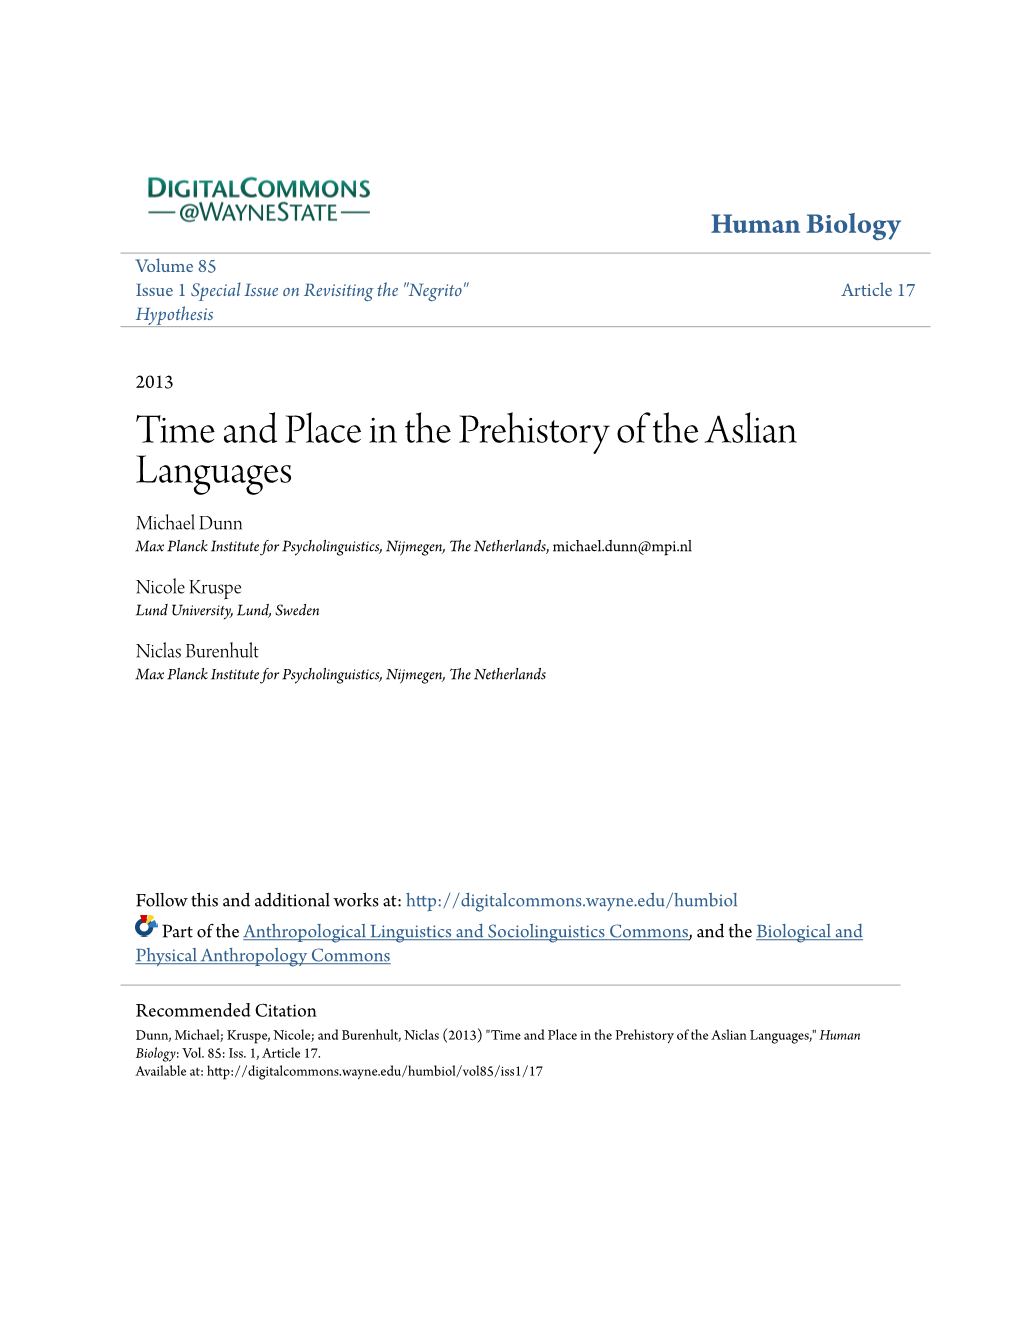 Time and Place in the Prehistory of the Aslian Languages Dunn, Michael